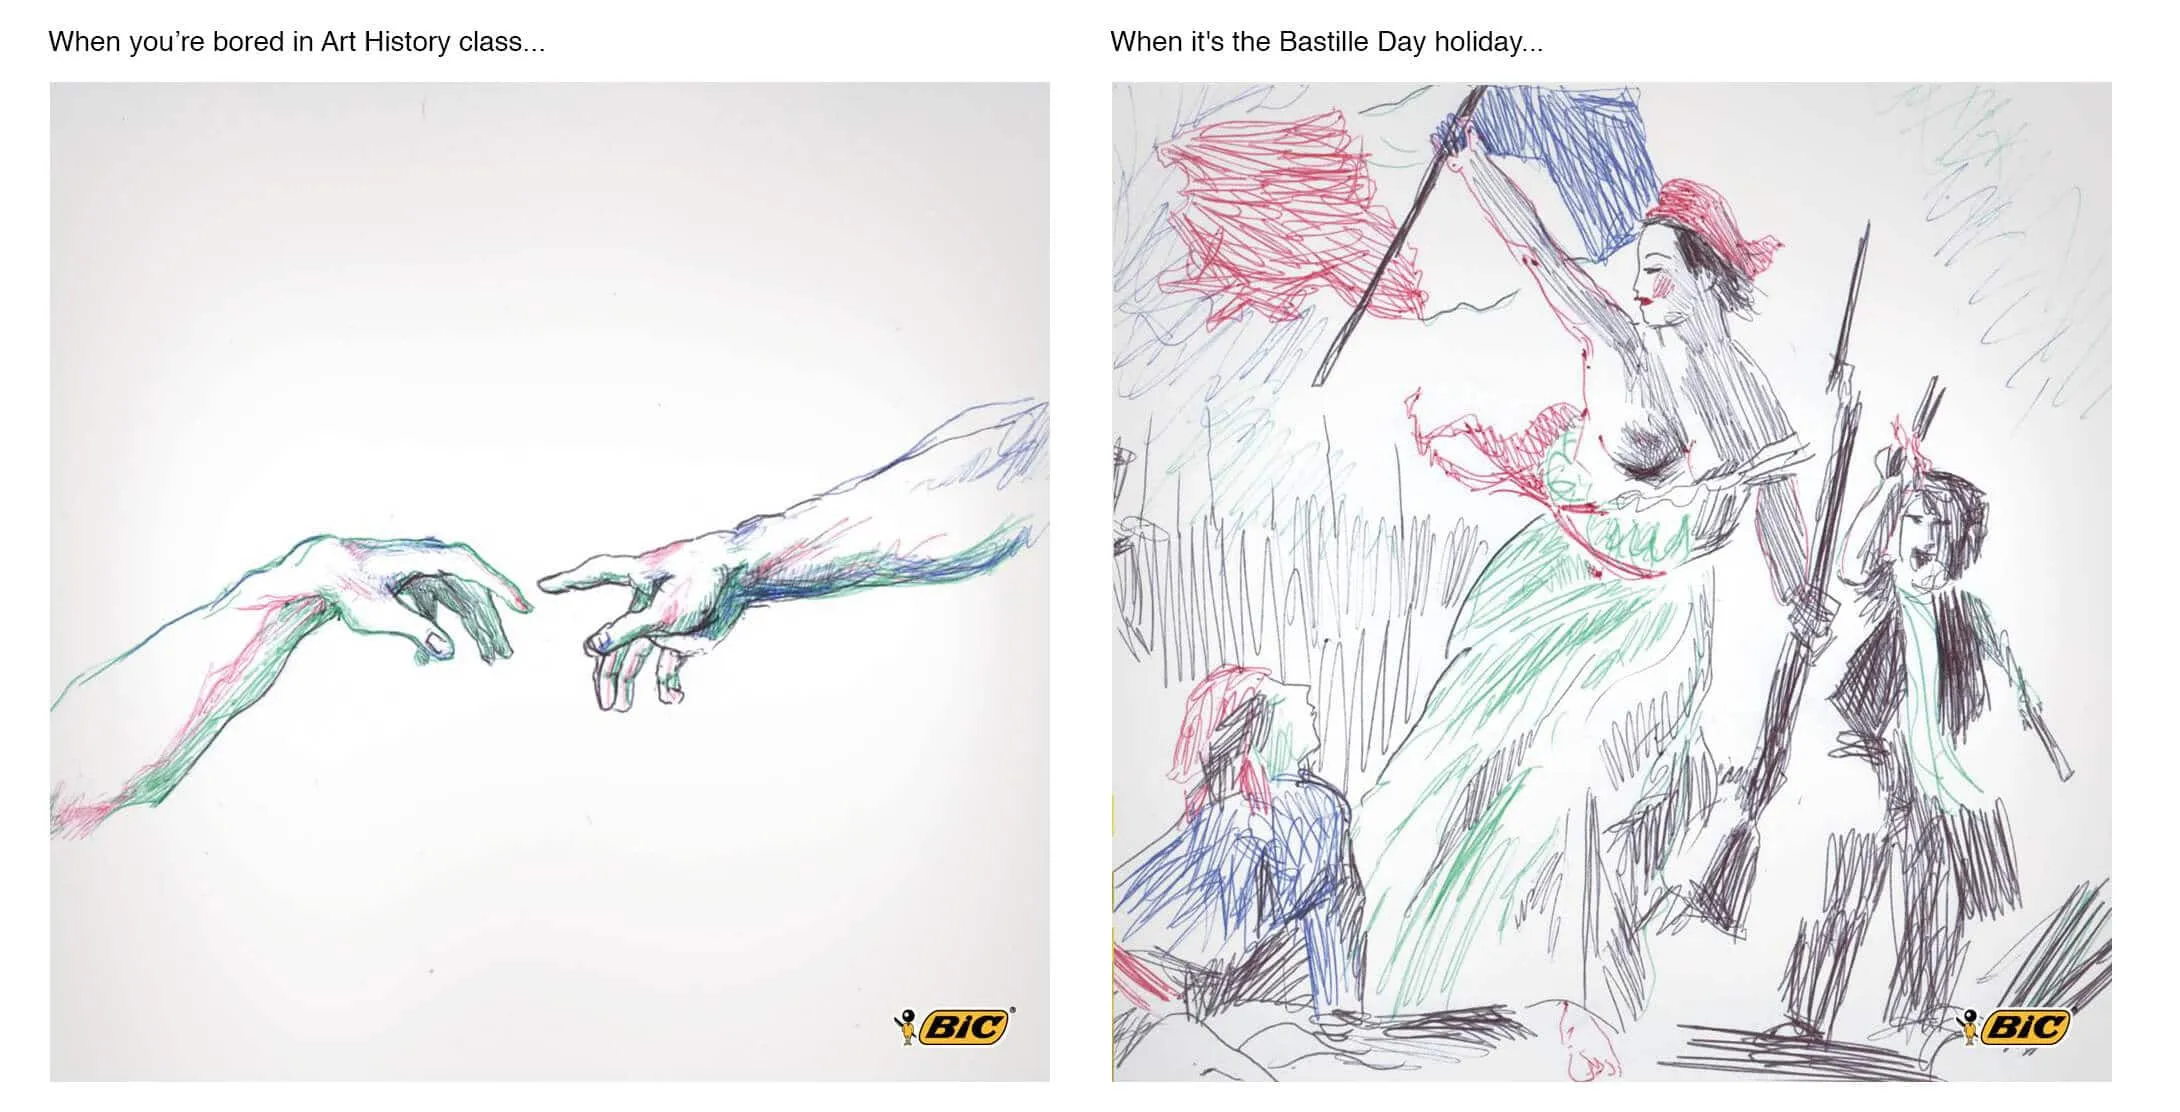 Facebook and Instagram posts for Bic 4-Colour pens with classical artwork themes